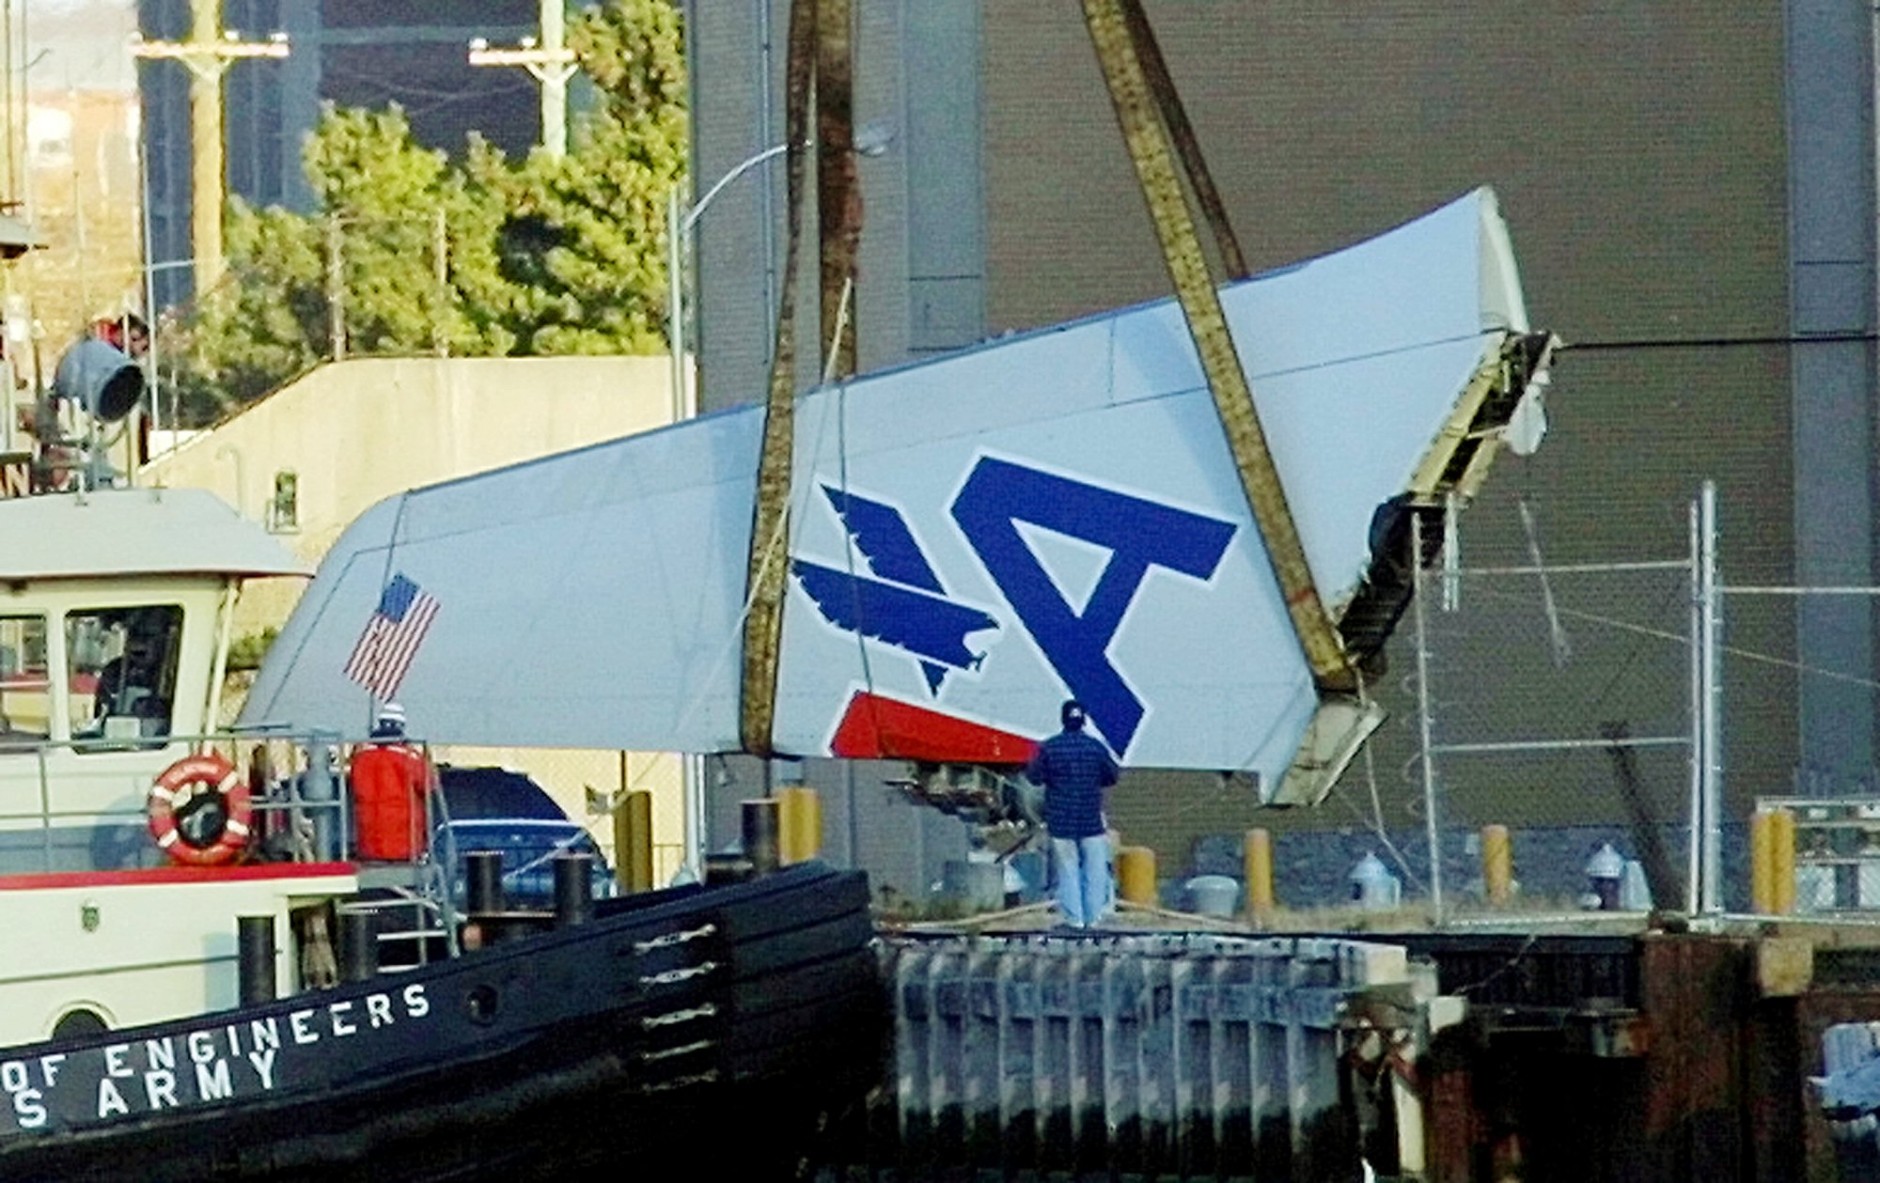 A large section of the tailpiece of American Airlines Flight 587 is lifted off a boat by a crane after the Airbus A300 crashed in the Rockaway Beach section of the Queens borough of New York Monday, Nov. 12, 2001. The tailpiece was recovered from Jamaica Bay and towed to shore. (AP Photo/Daniel P. Derella)